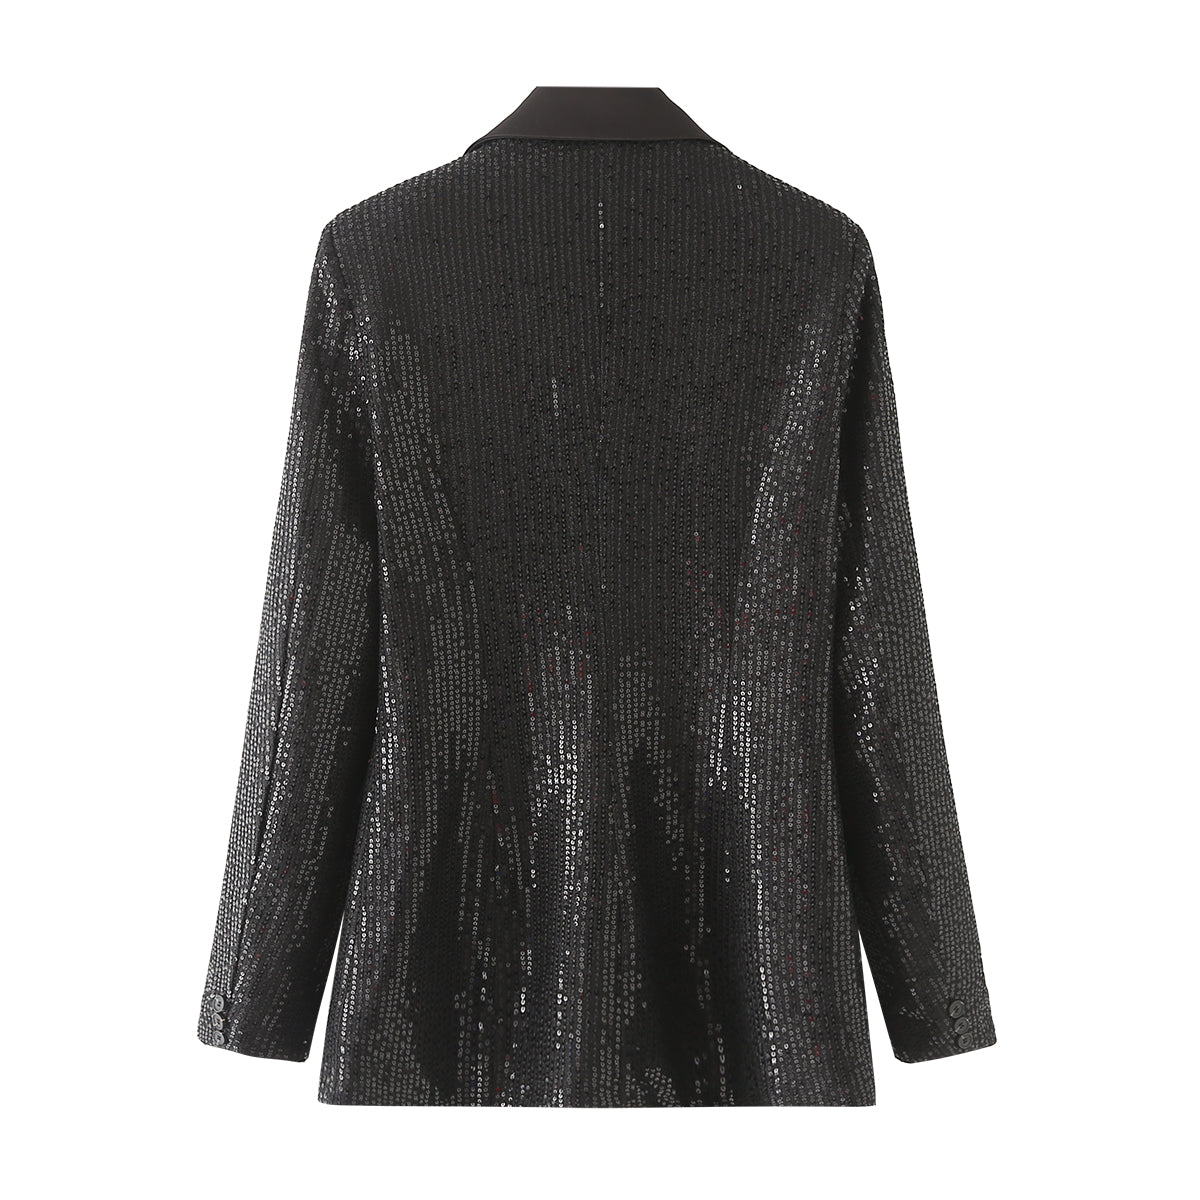 Socialite Affordable Luxury Sequined Spring All Match Slim Small Blazers